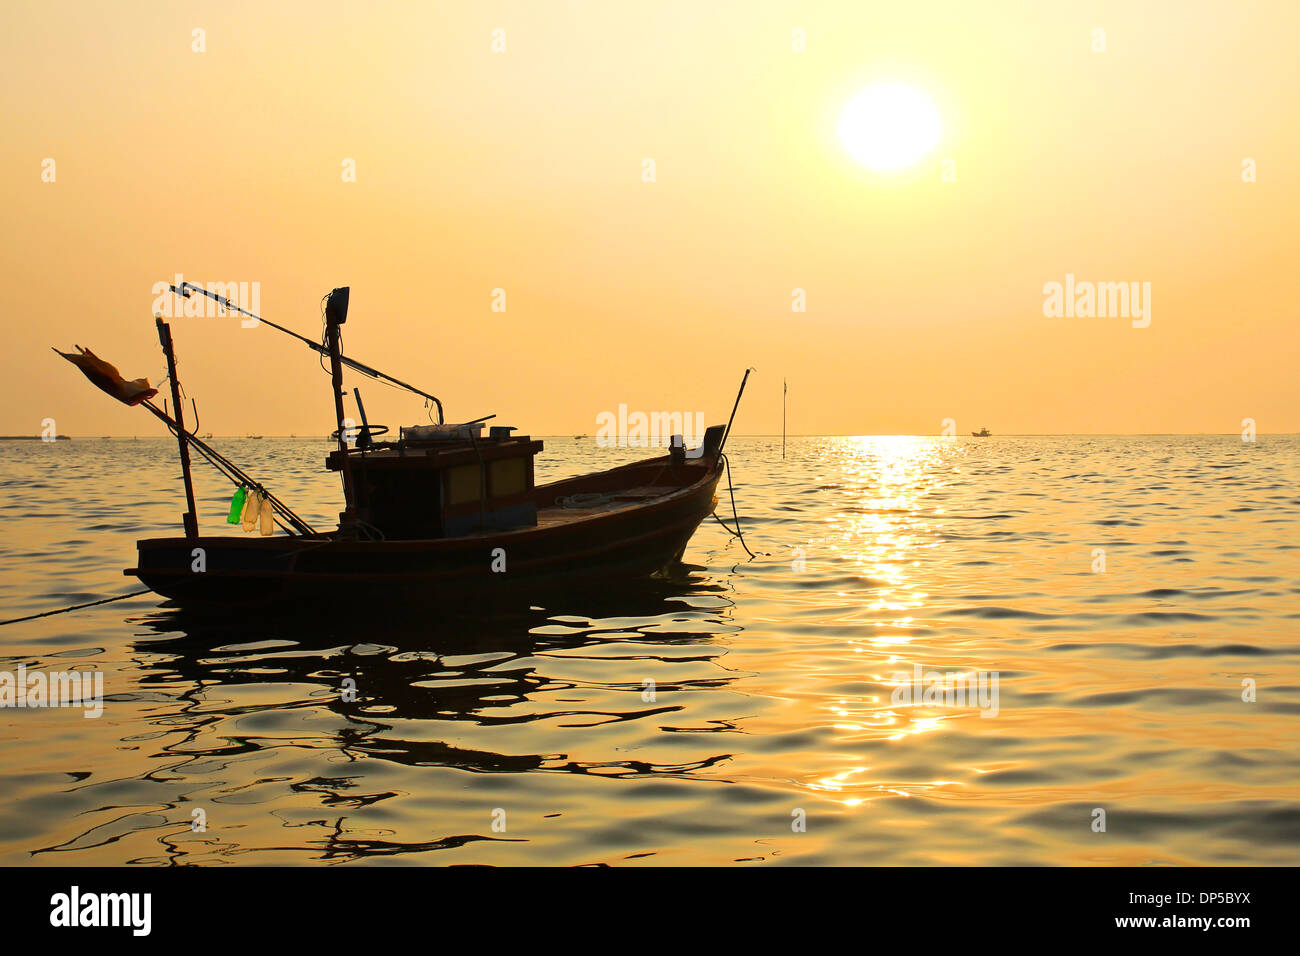 Silhouette of fishing boat at sunset Stock Photo